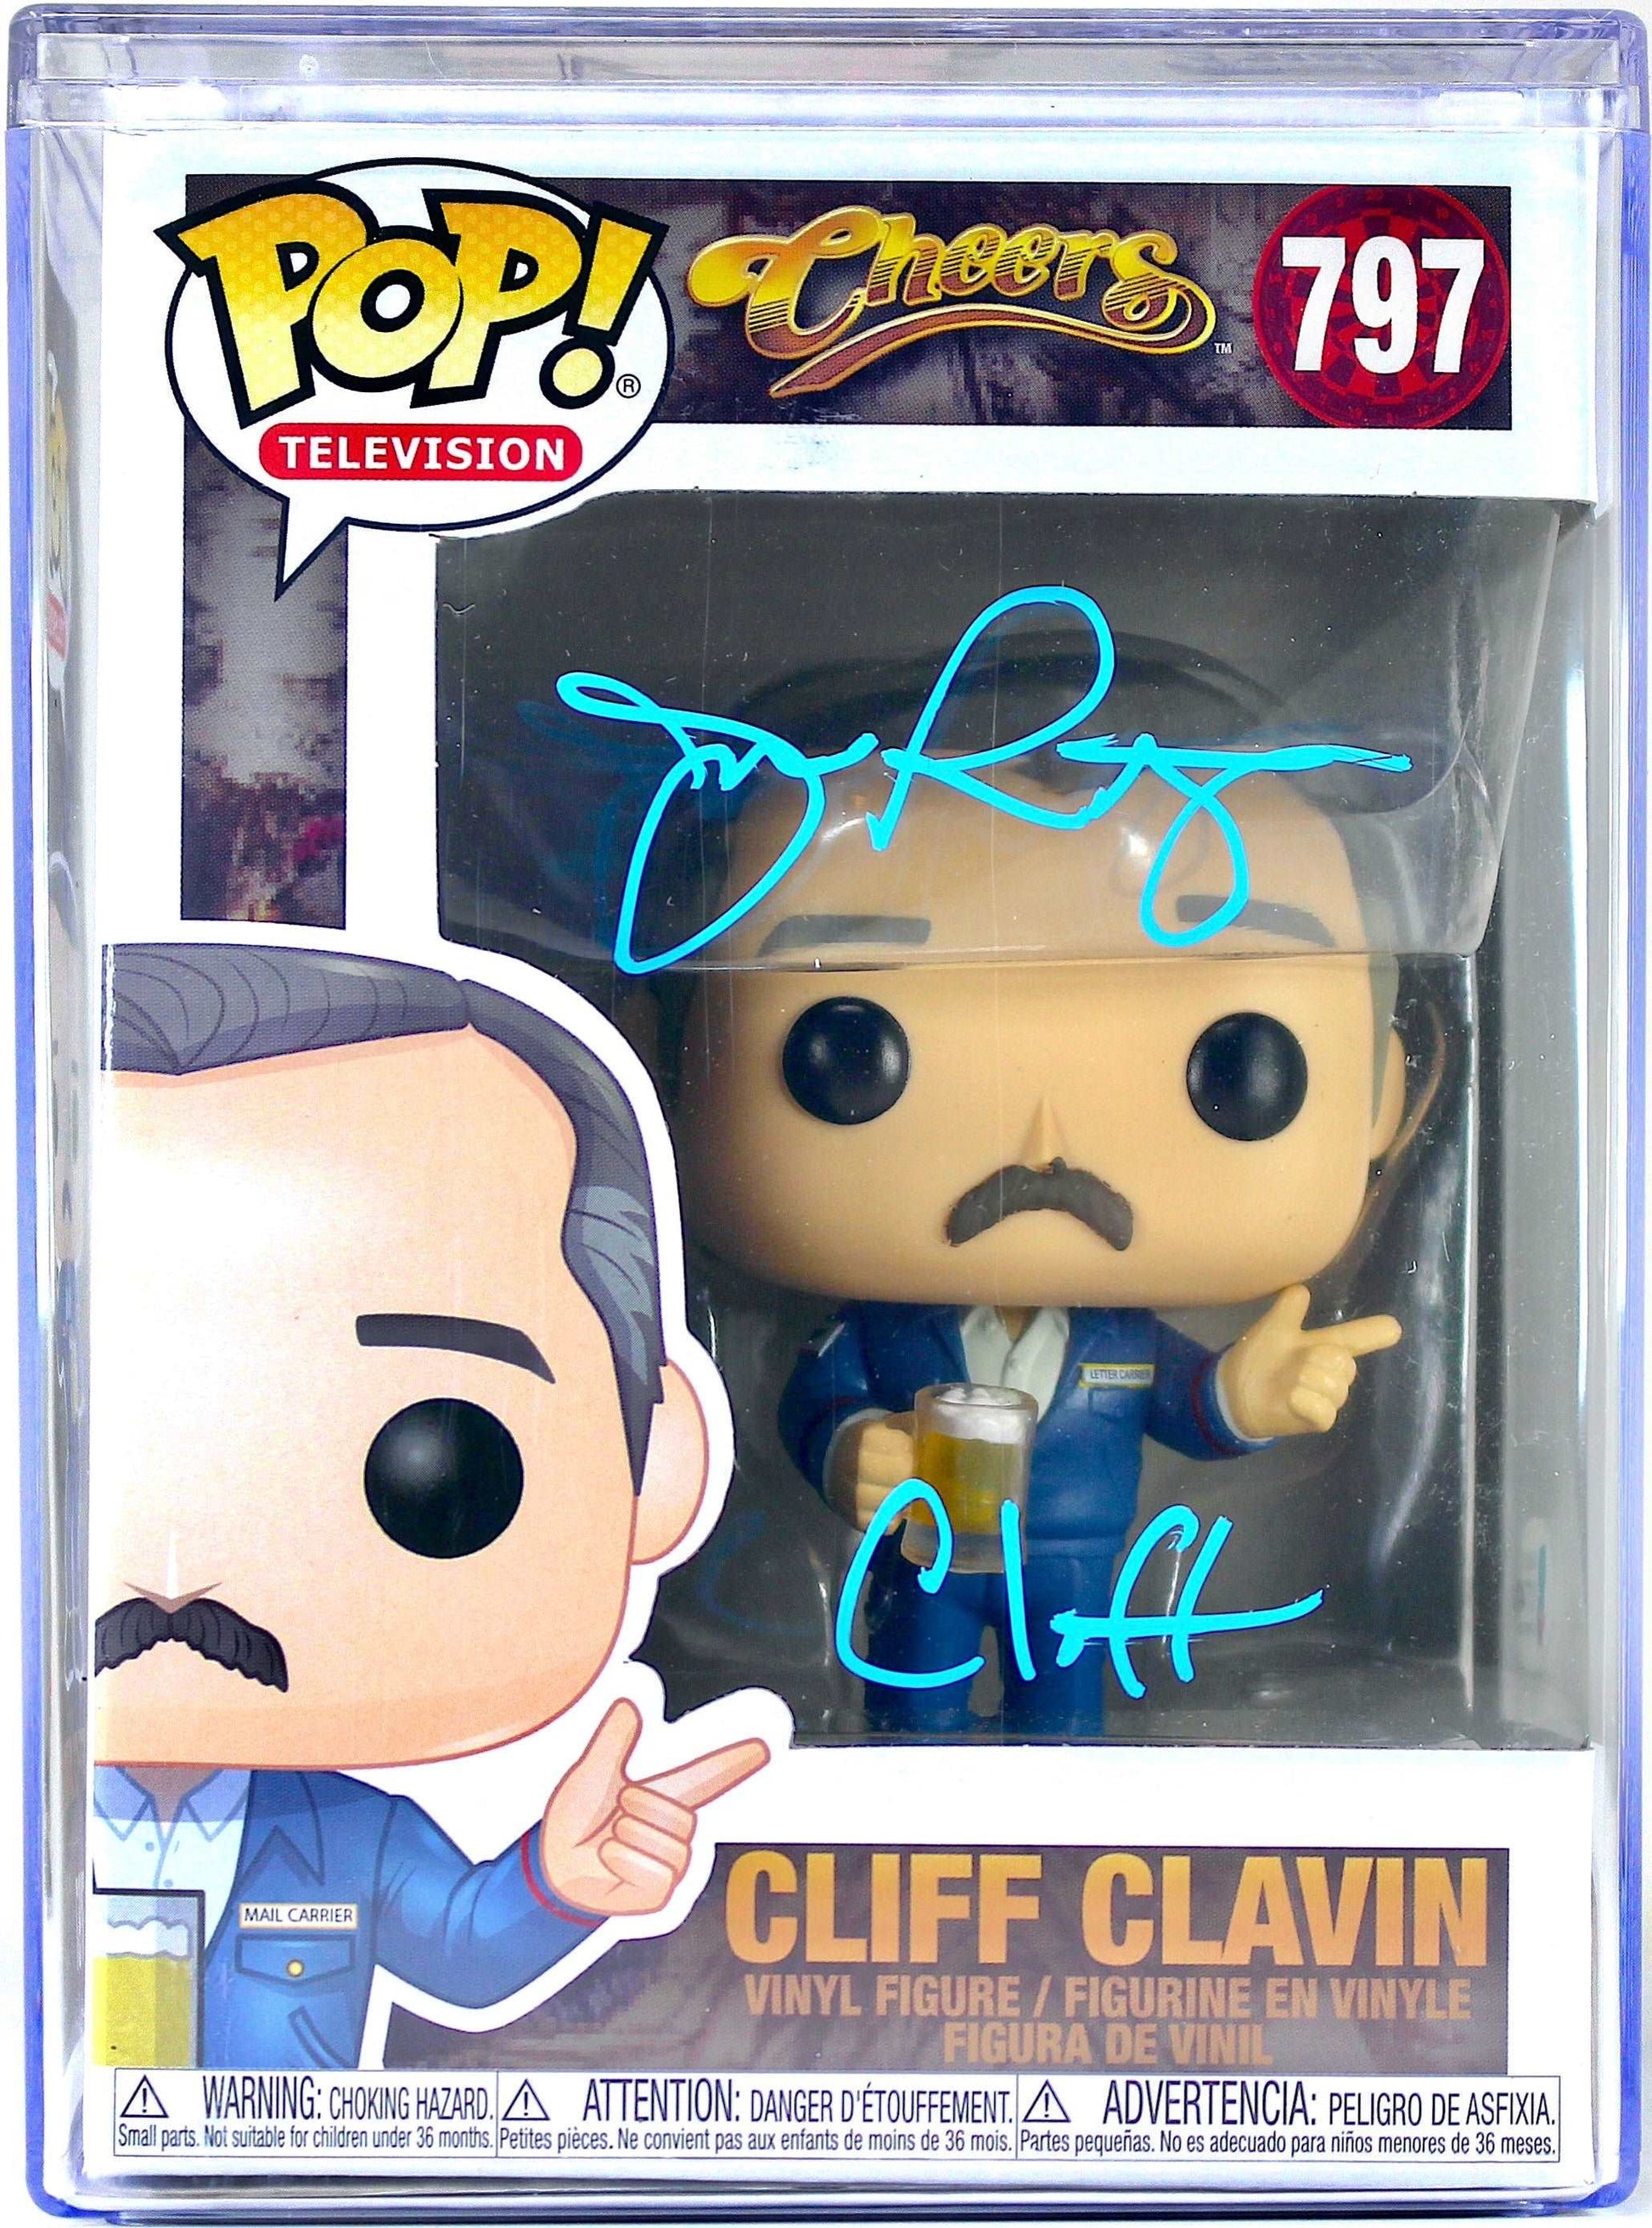 Autographed Signed & Inscribed Funko Pop! Television Cheers Cliff Clavin - John Ratzenberger Signature is Authenticated By Beckett. ✅ - DaFunkoShop - Funko Pop! Television